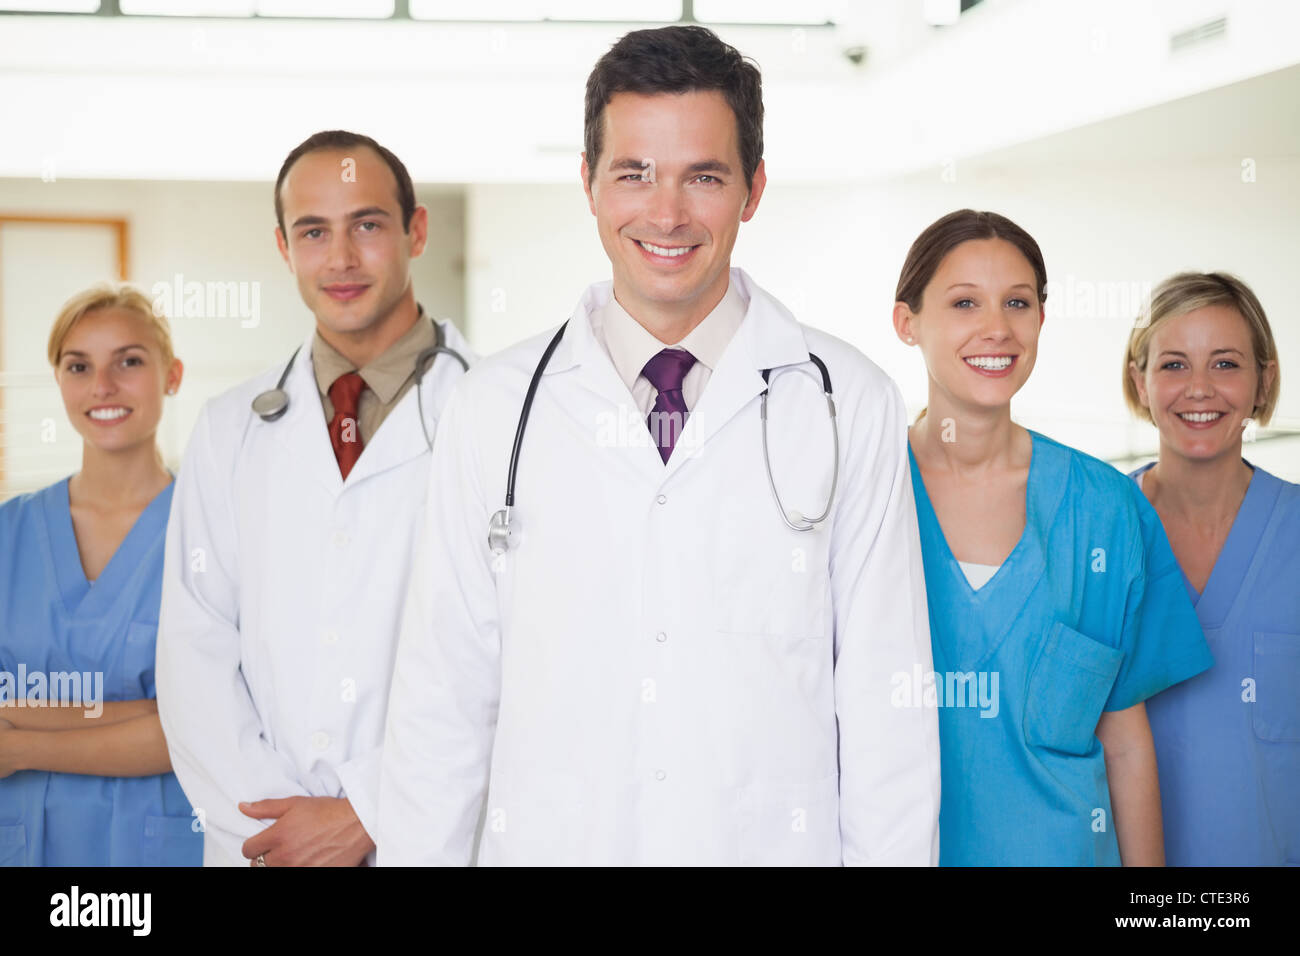 Doctors with nurses looking at camera Stock Photo